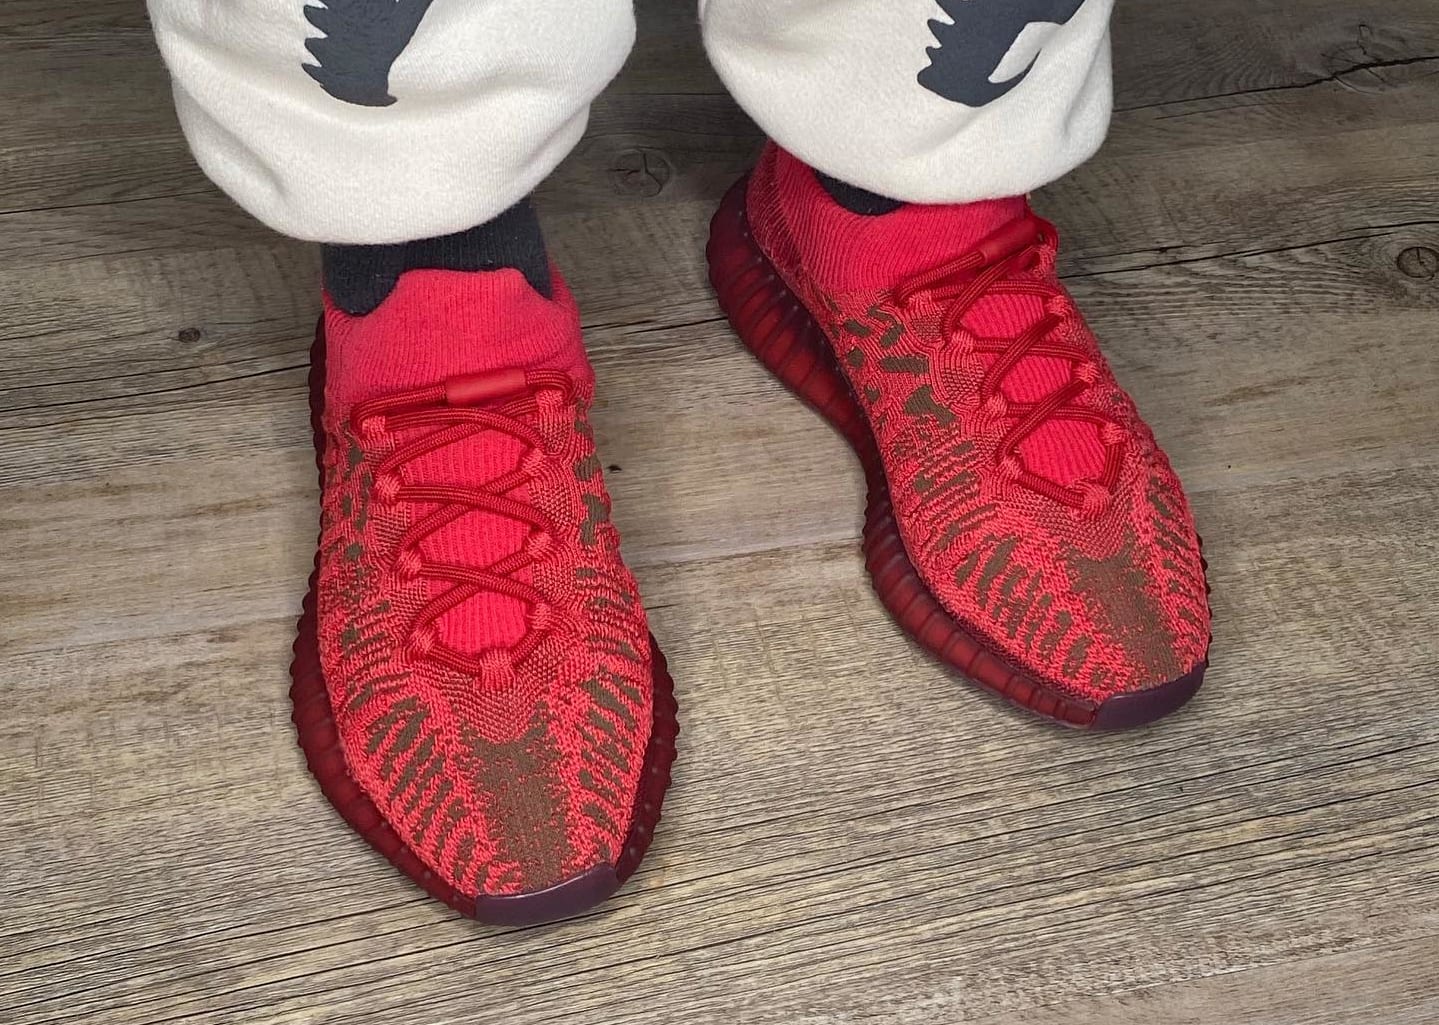 Adidas Yeezy Boost 350 V2 CMPCT 'Slate Red'